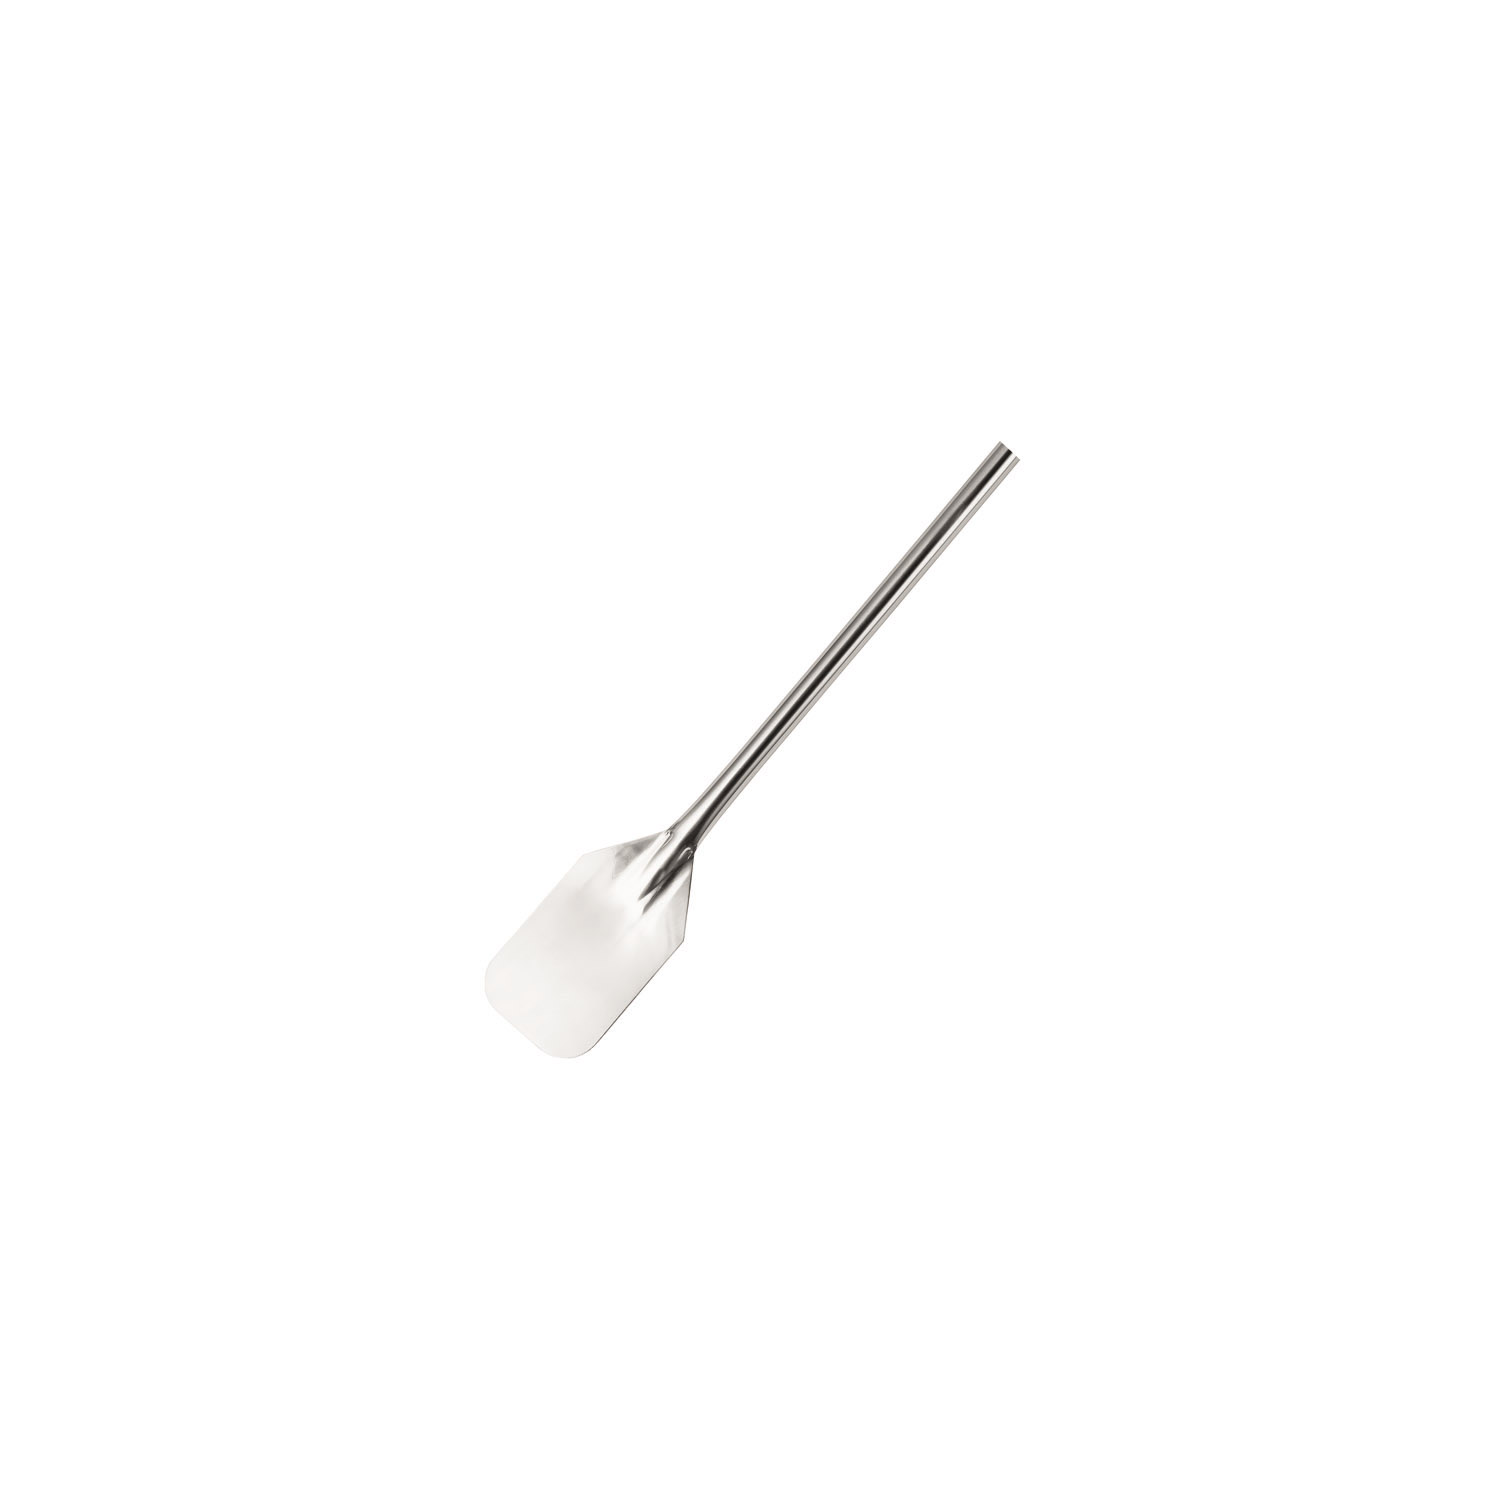 CAC China SSMP-24 Stainless Steel Mixing Paddle 24"